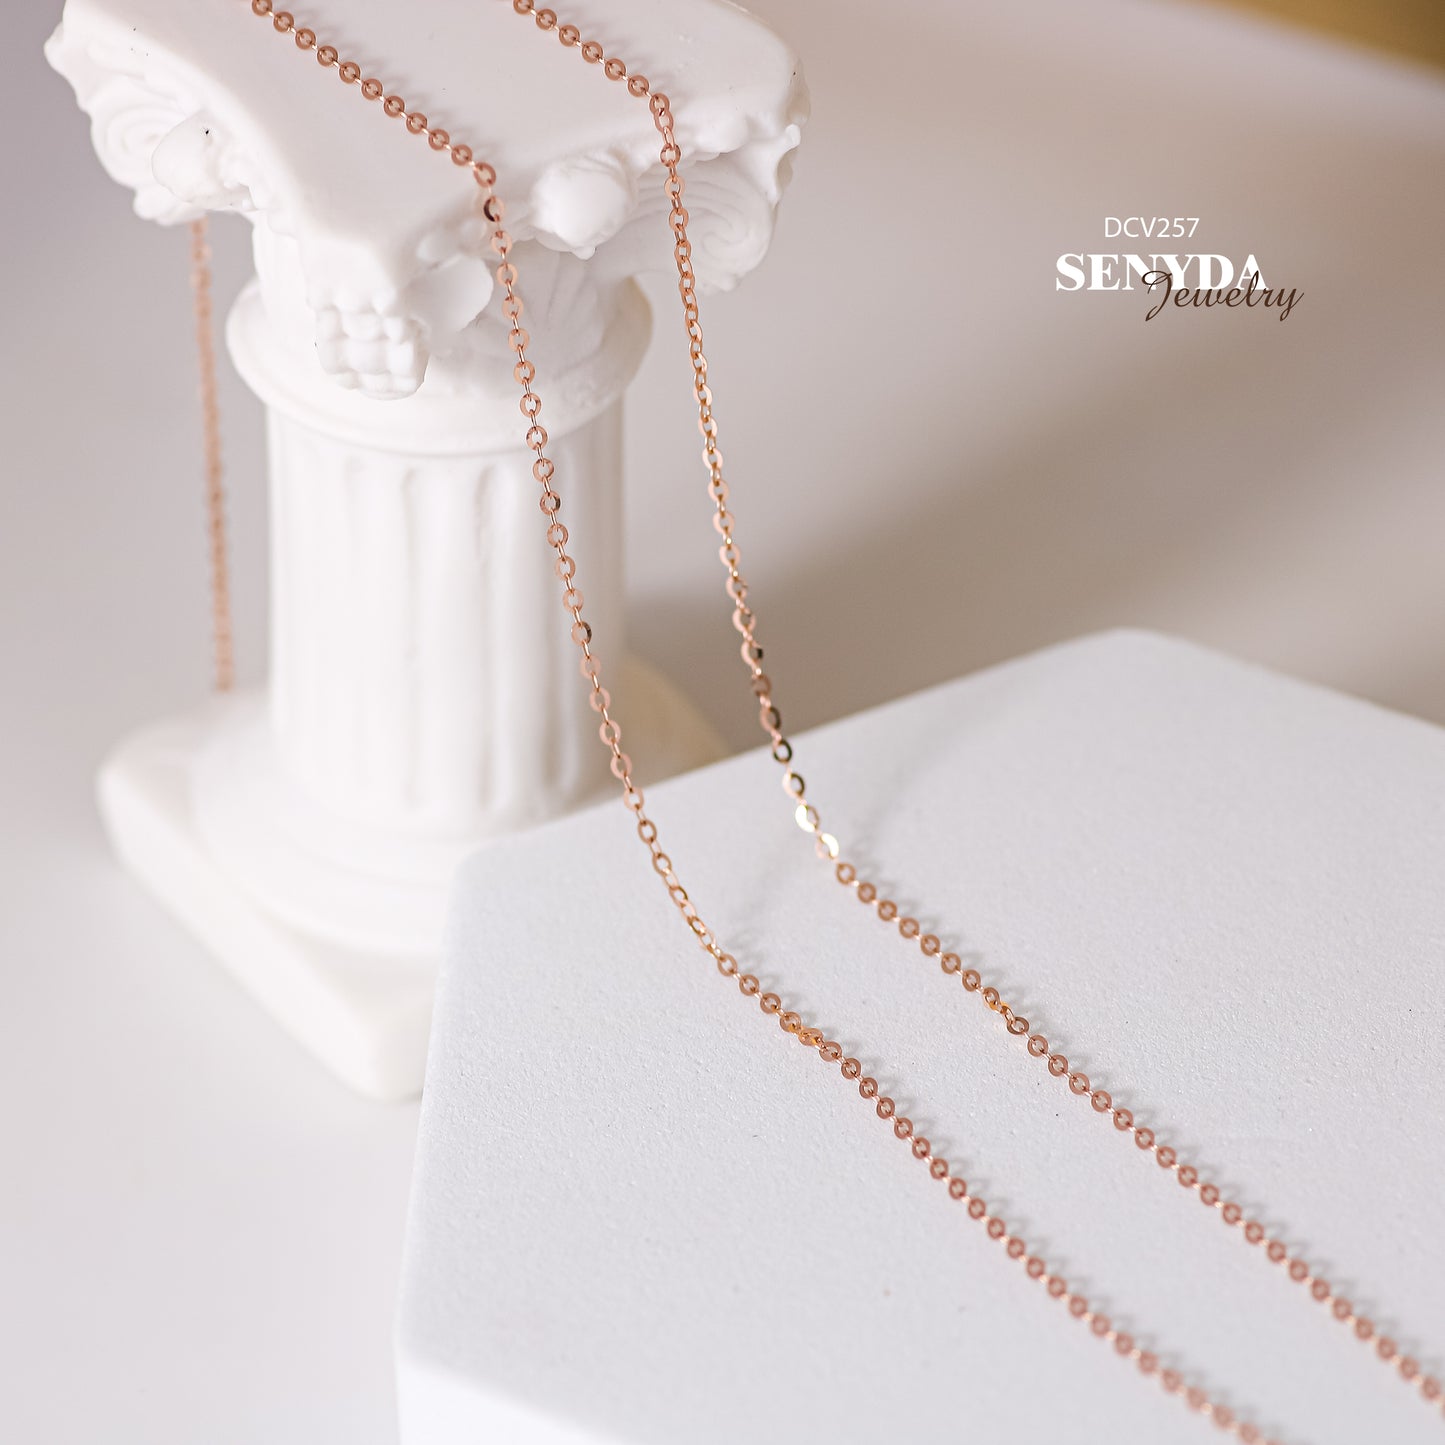 Senyda 18K Solid Gold Dainty Chain Necklace